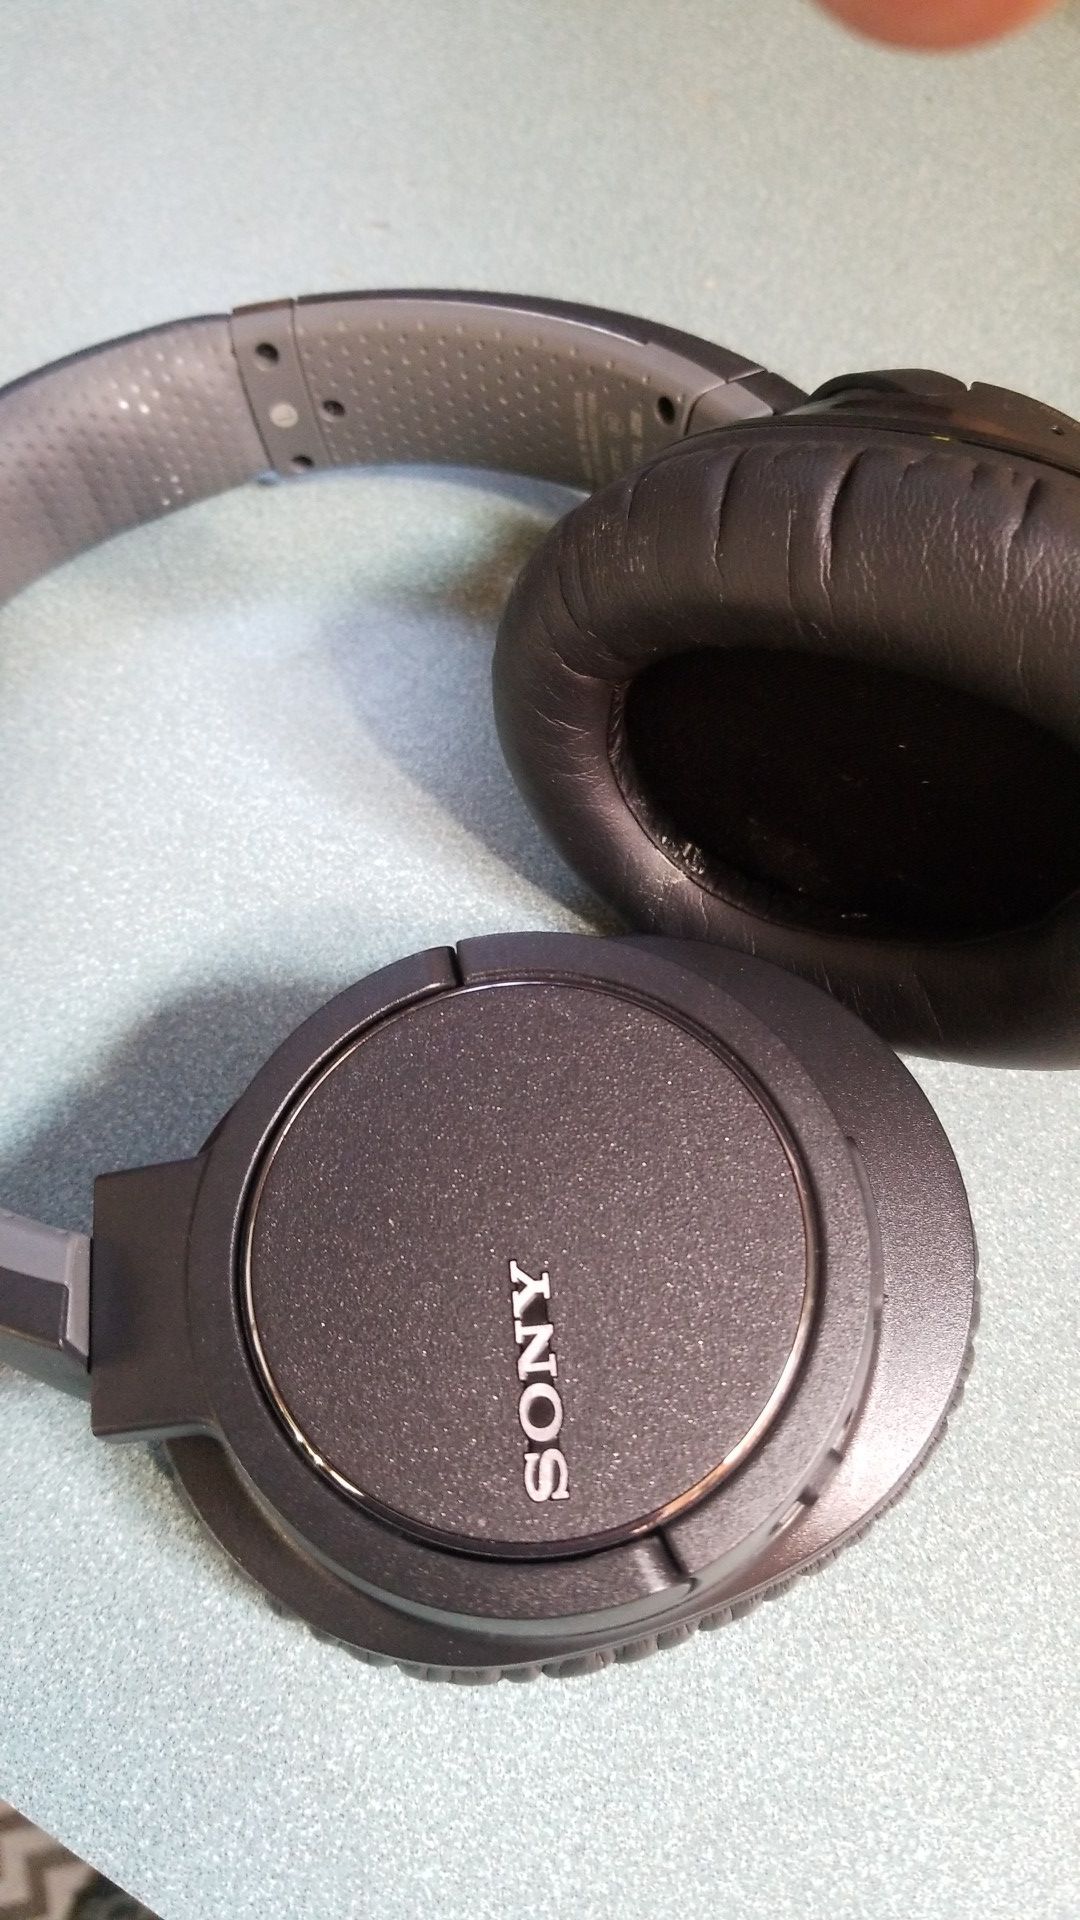 Sony noise cancelling bluetooth headphones